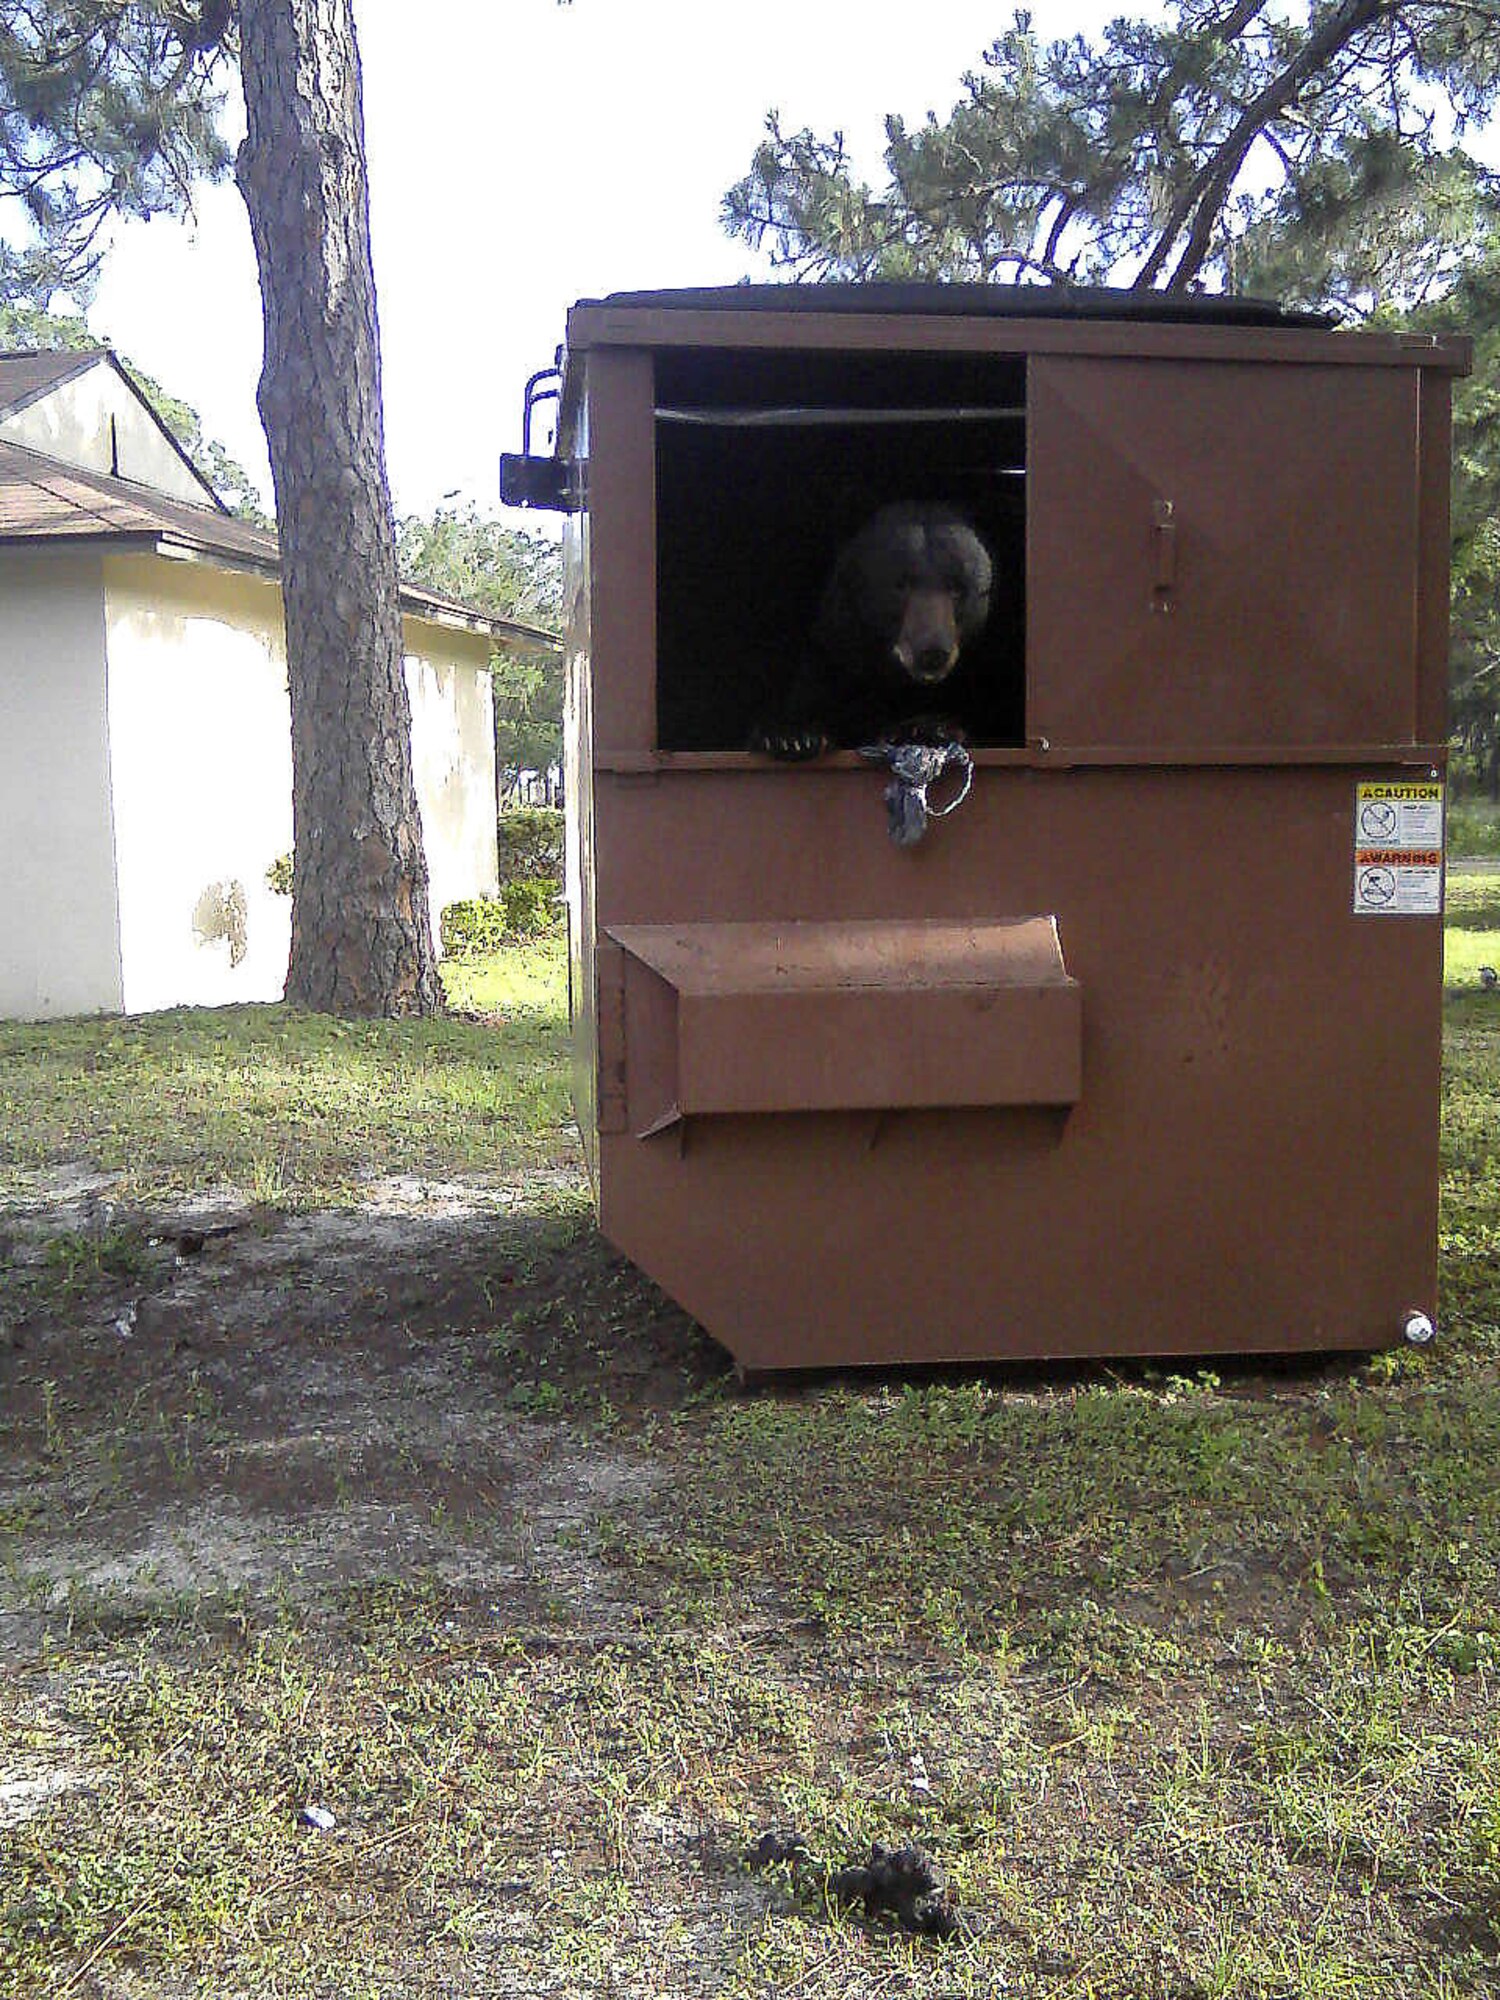 A Florida black bear rummages through a dumpster at Tyndall Air Force Base, Fla. By securing trash and garbage cans Tyndall residents can help reduce the frequency of bear incursions into residential areas. (Courtesy Photo)